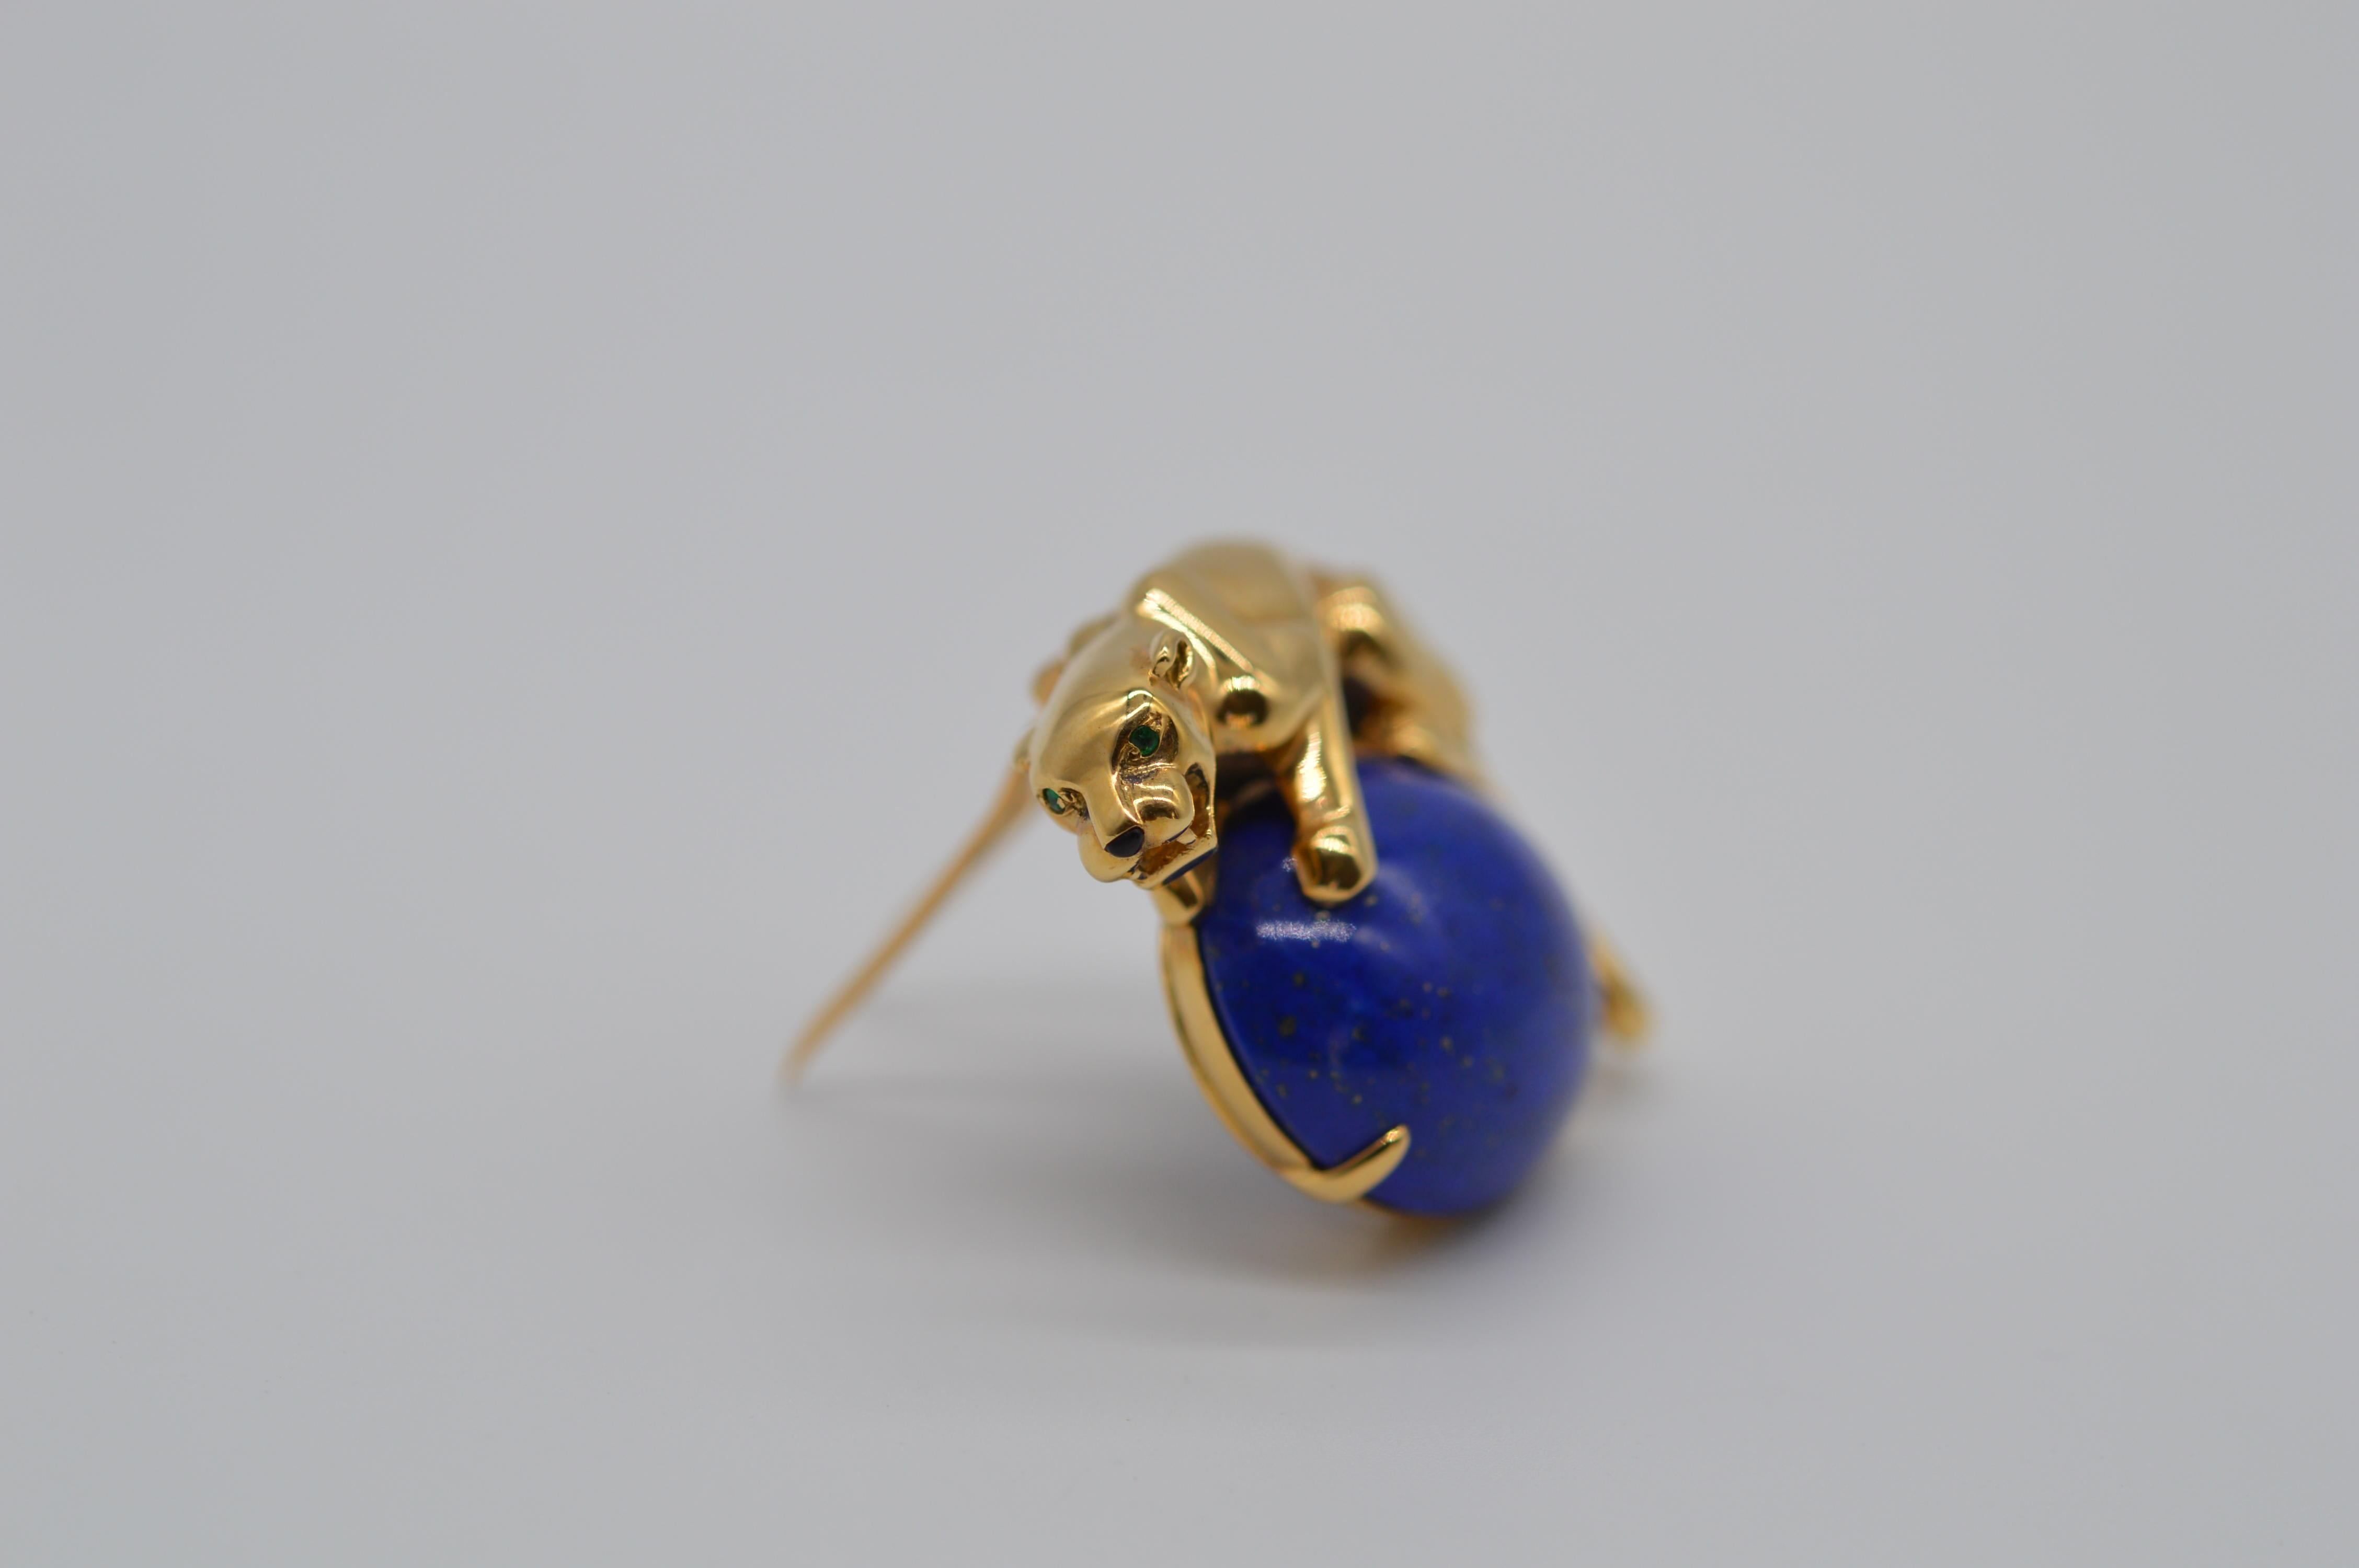 Cartier Panthère Lapis Lazuli Brooch
18K Yellow Gold
Weight 30 grams
Emerald Eye
Vintage unworn condition
With original certificate from Cartier
From 1995